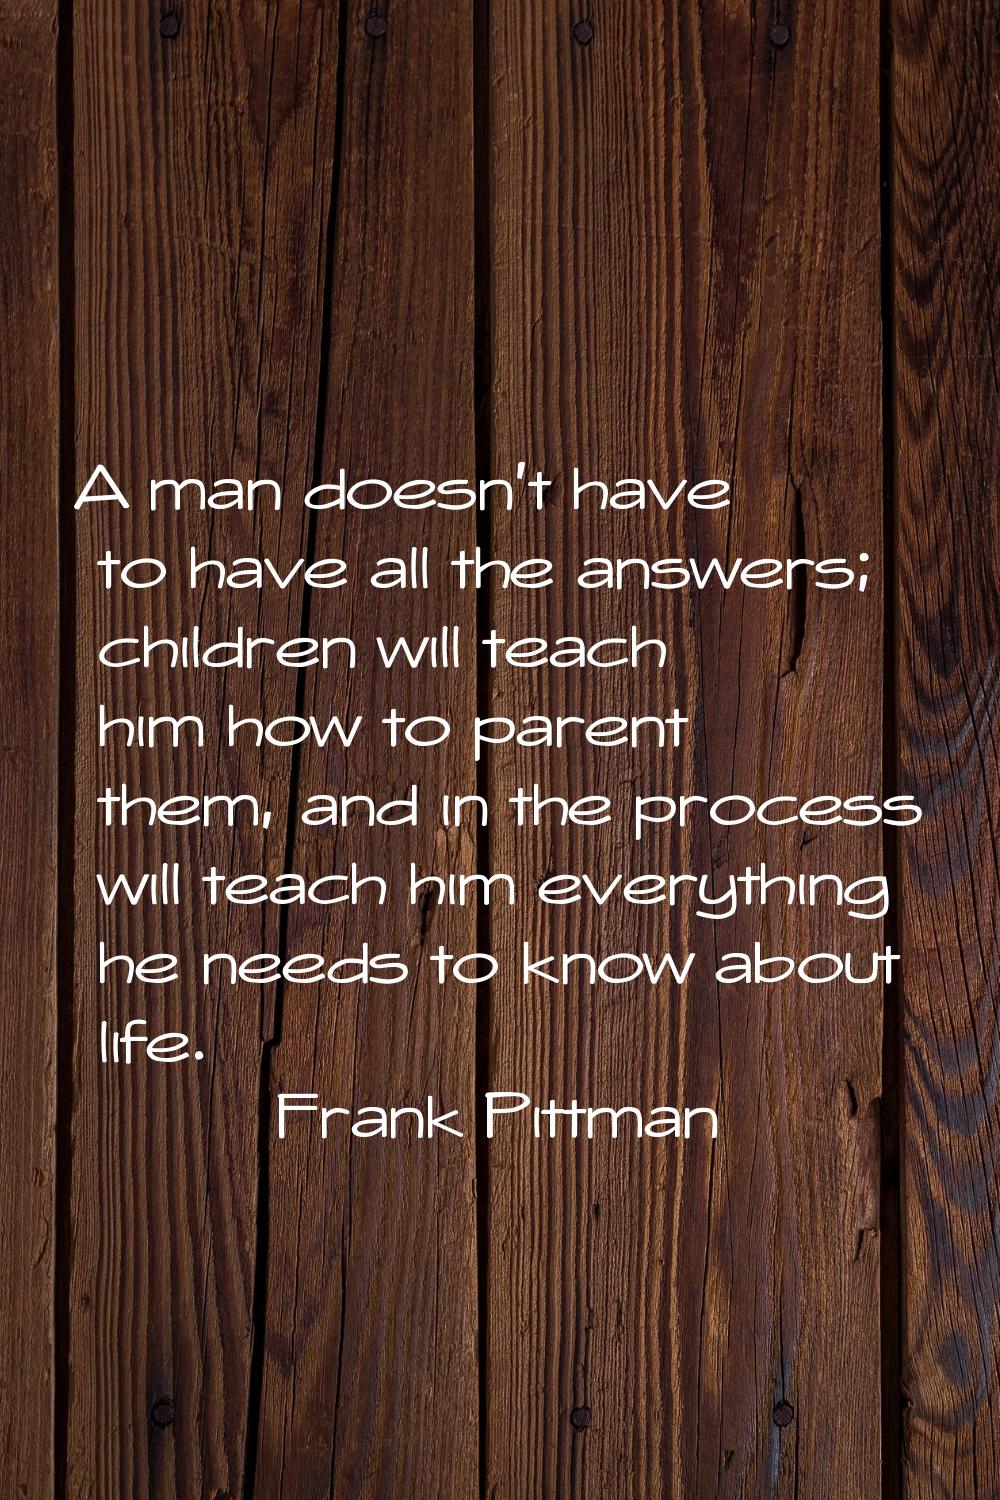 A man doesn't have to have all the answers; children will teach him how to parent them, and in the 